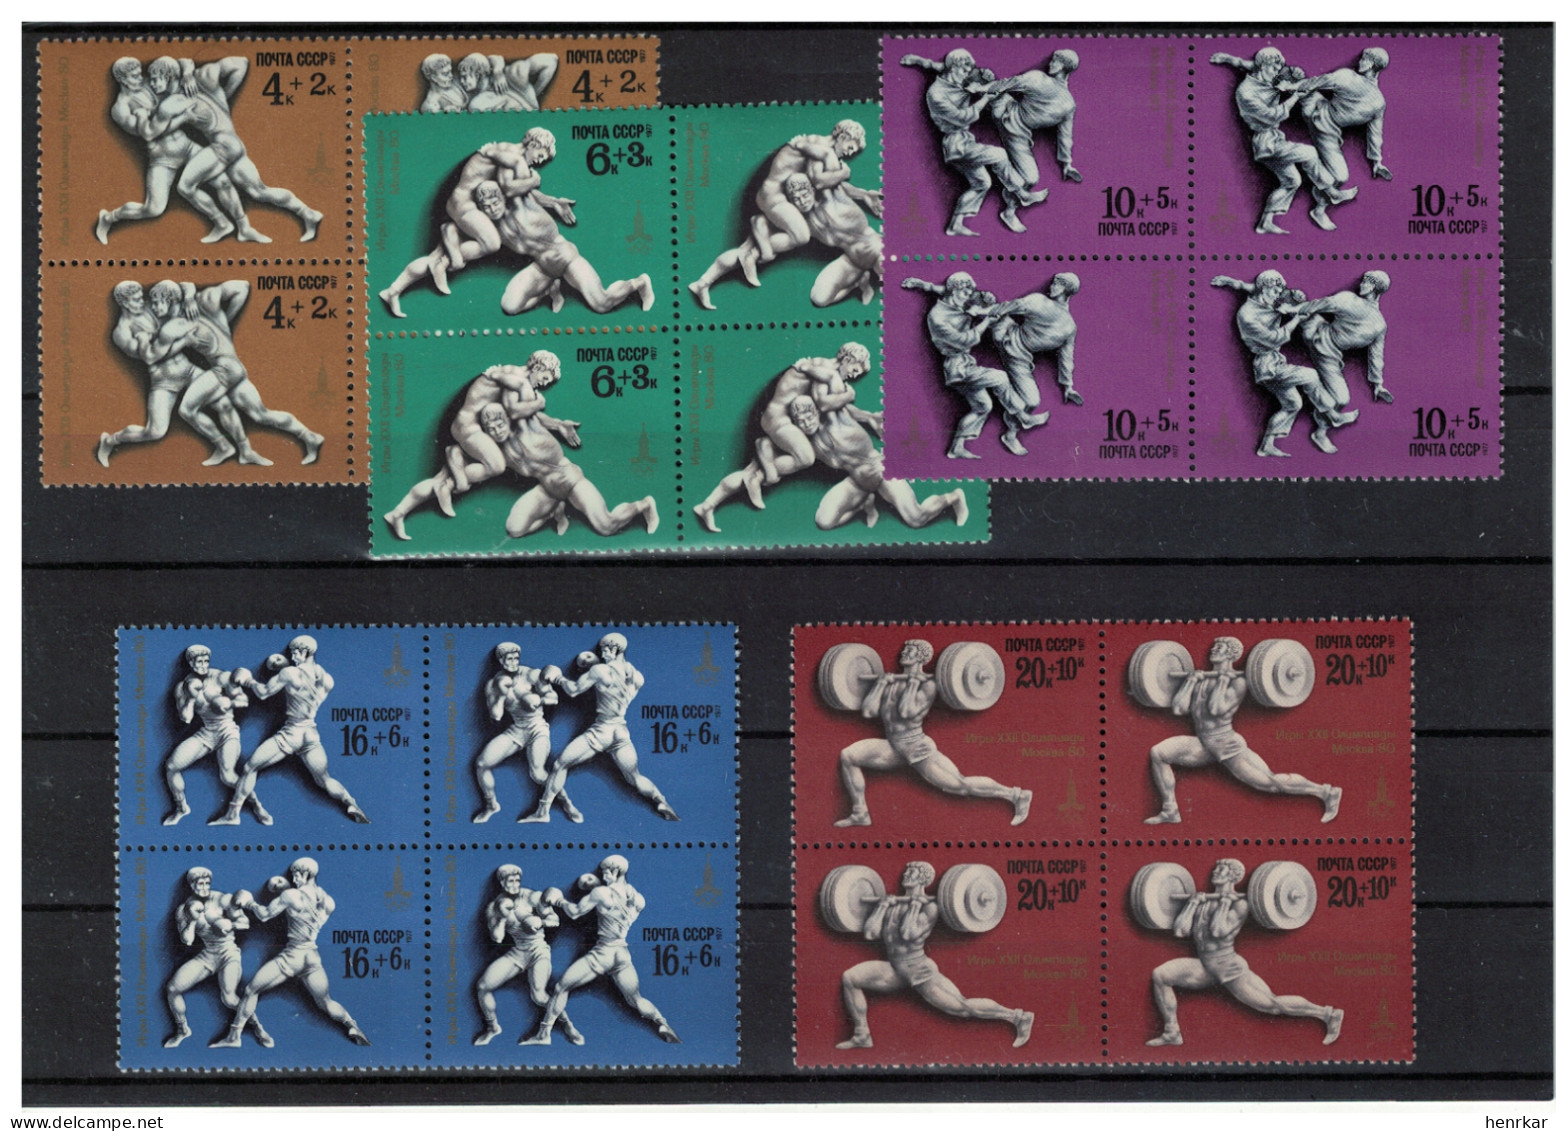 Russia 1977 Olympic Games Moscow 80, Blocks Of 4 MNH OG - Ungebraucht